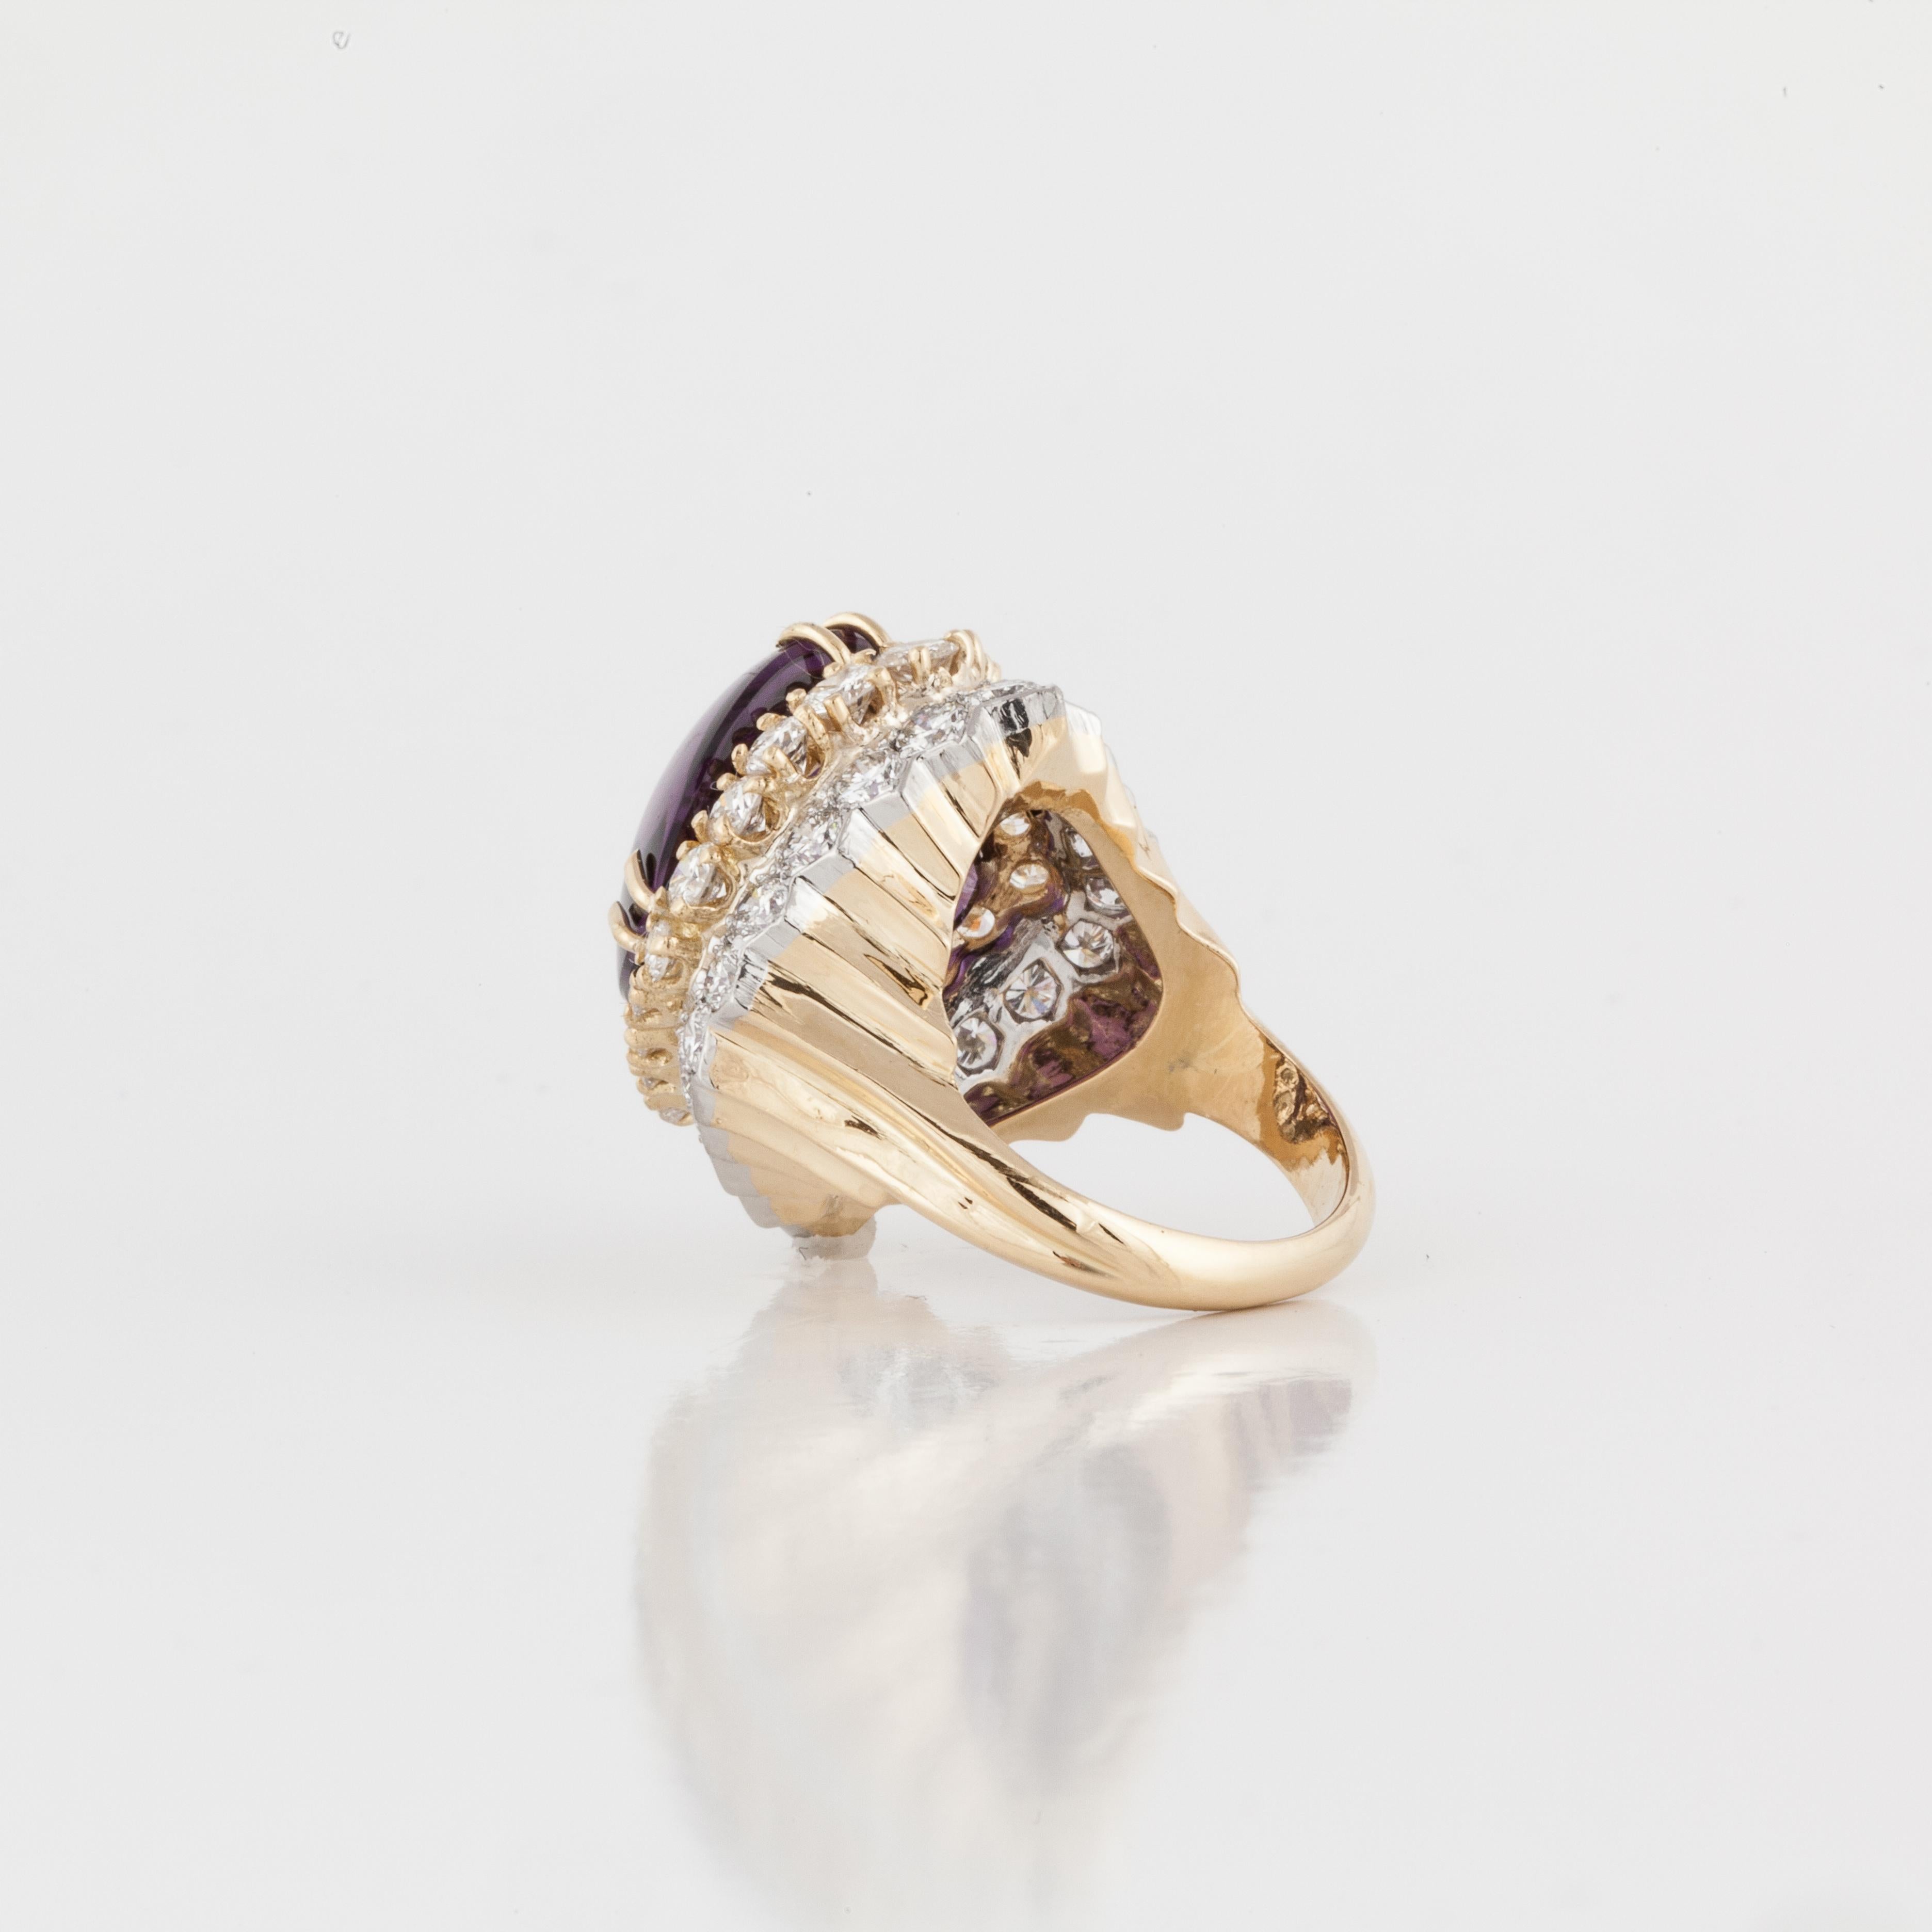 Cabochon Amethyst and Diamond Ring in 18K Gold In Good Condition For Sale In Houston, TX